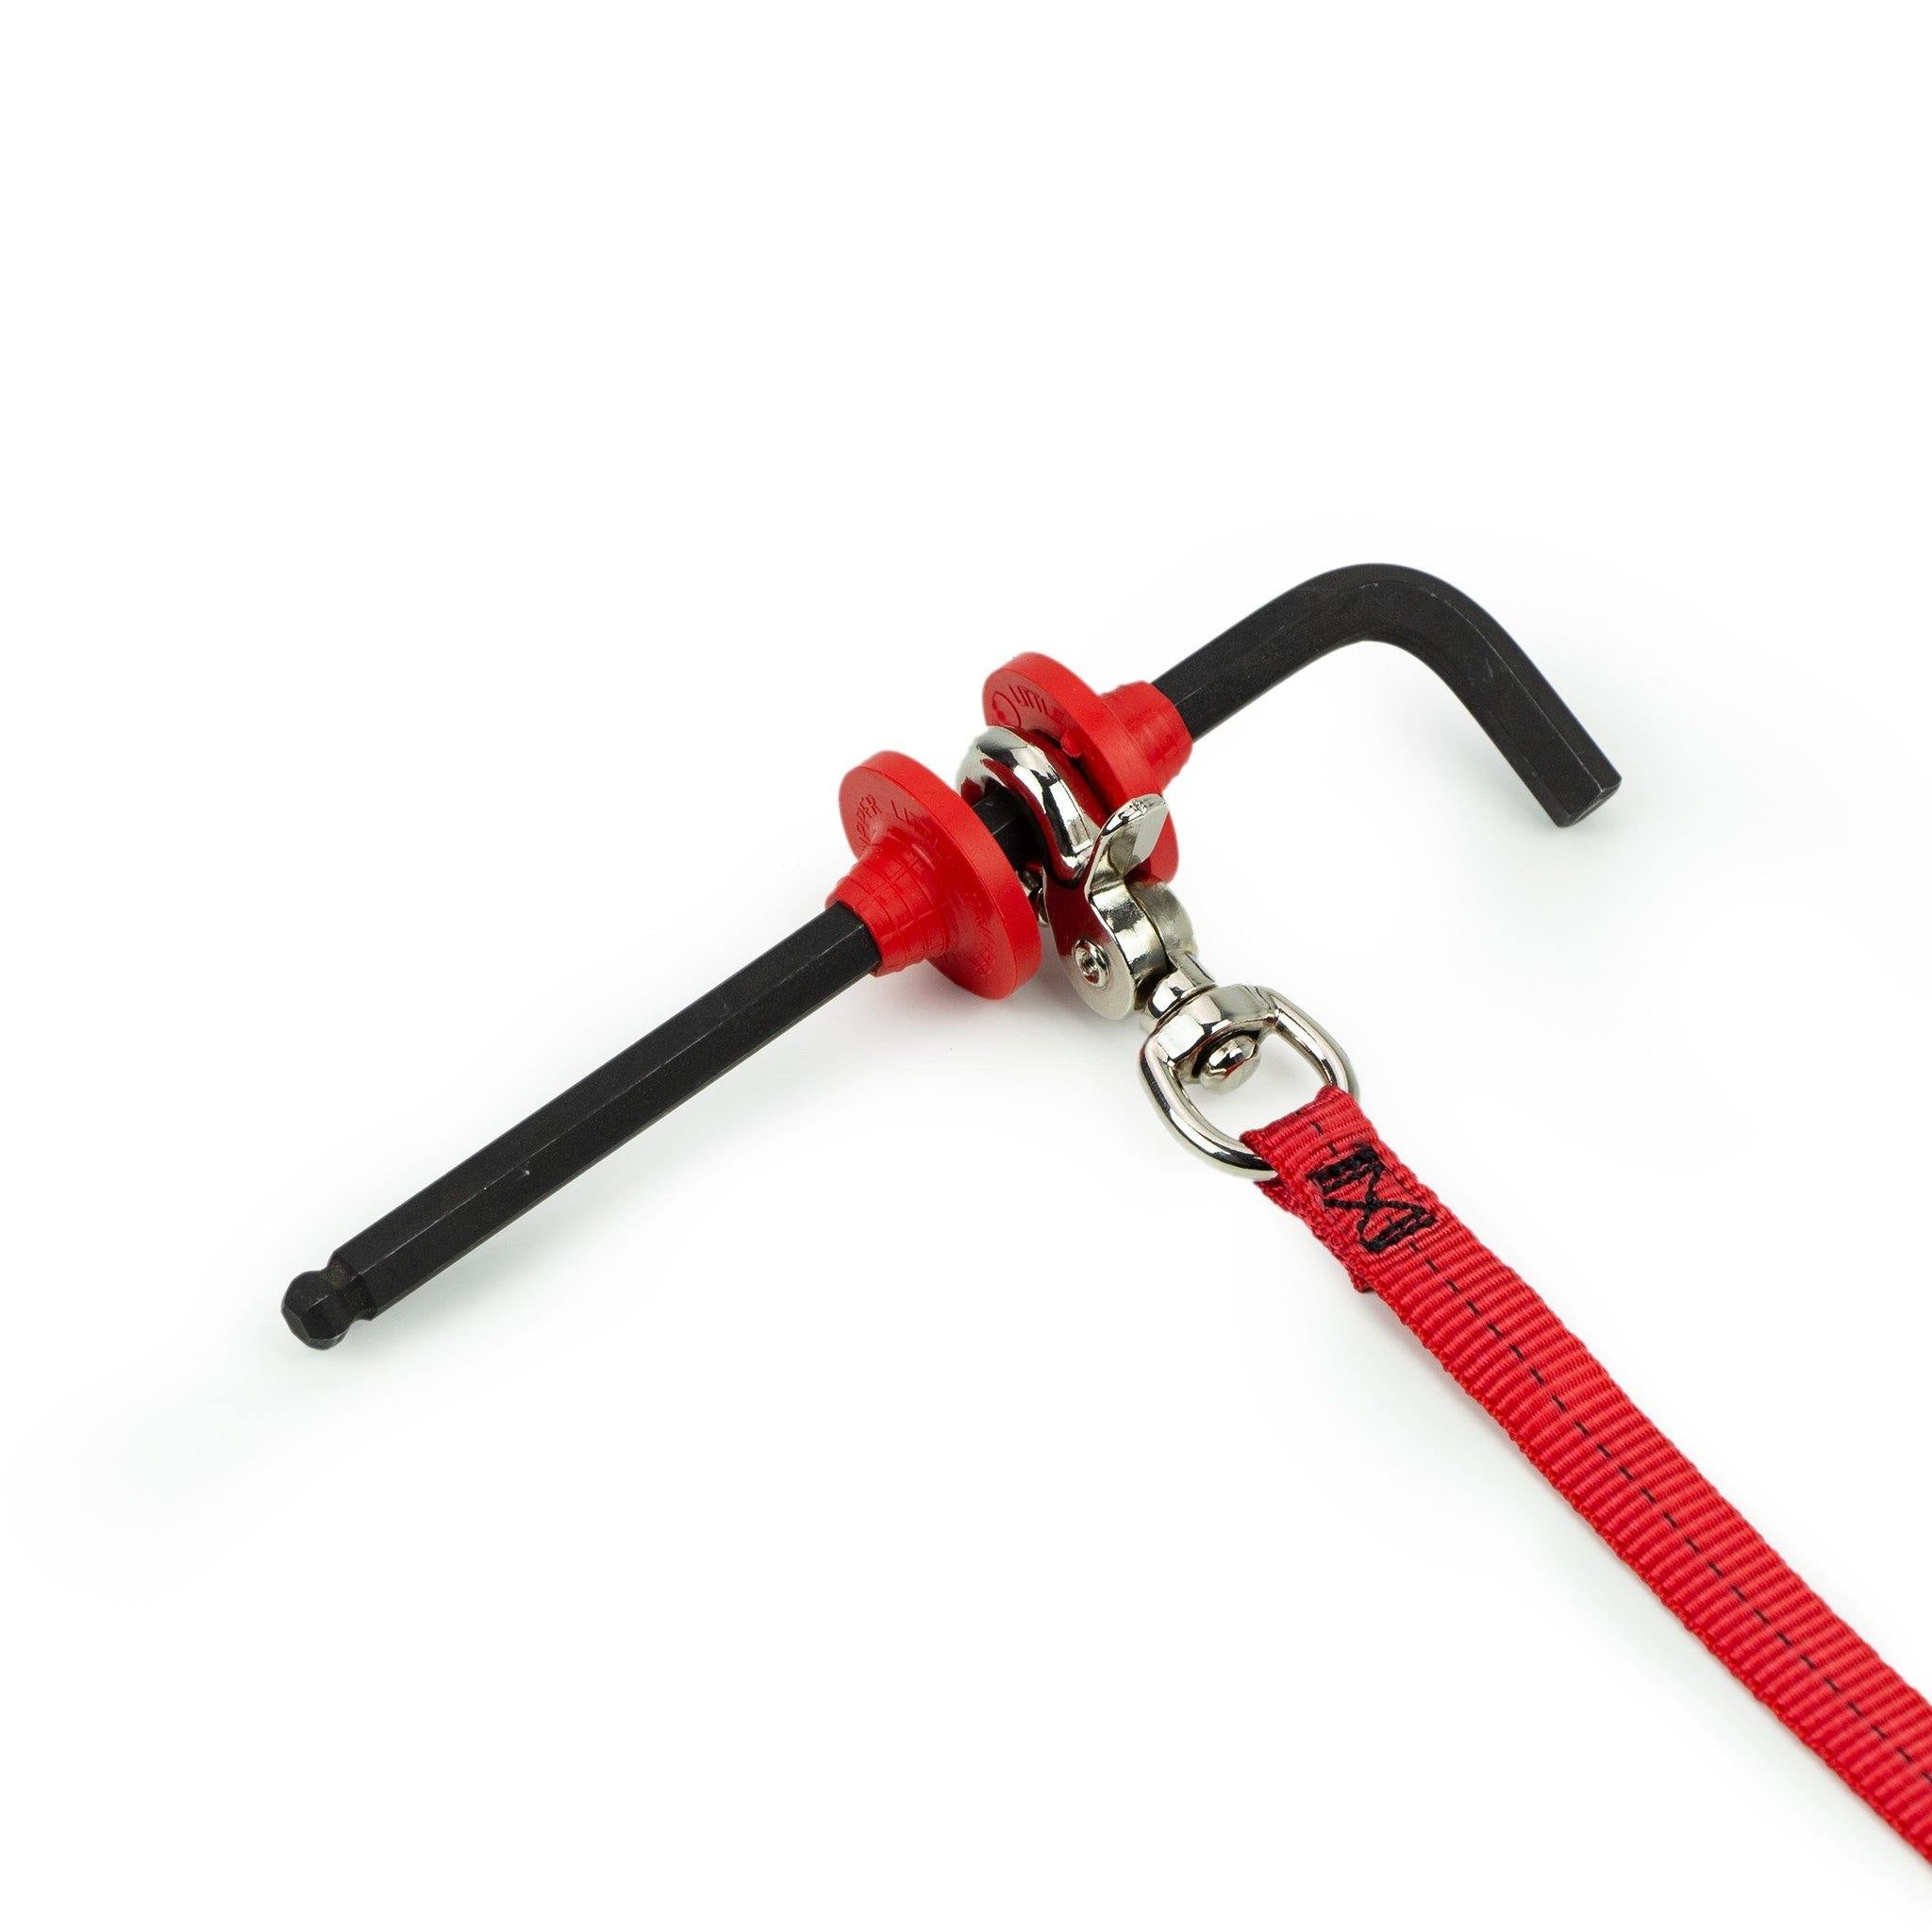 GRIPPS Little Grippers applied to allen key with tool tether